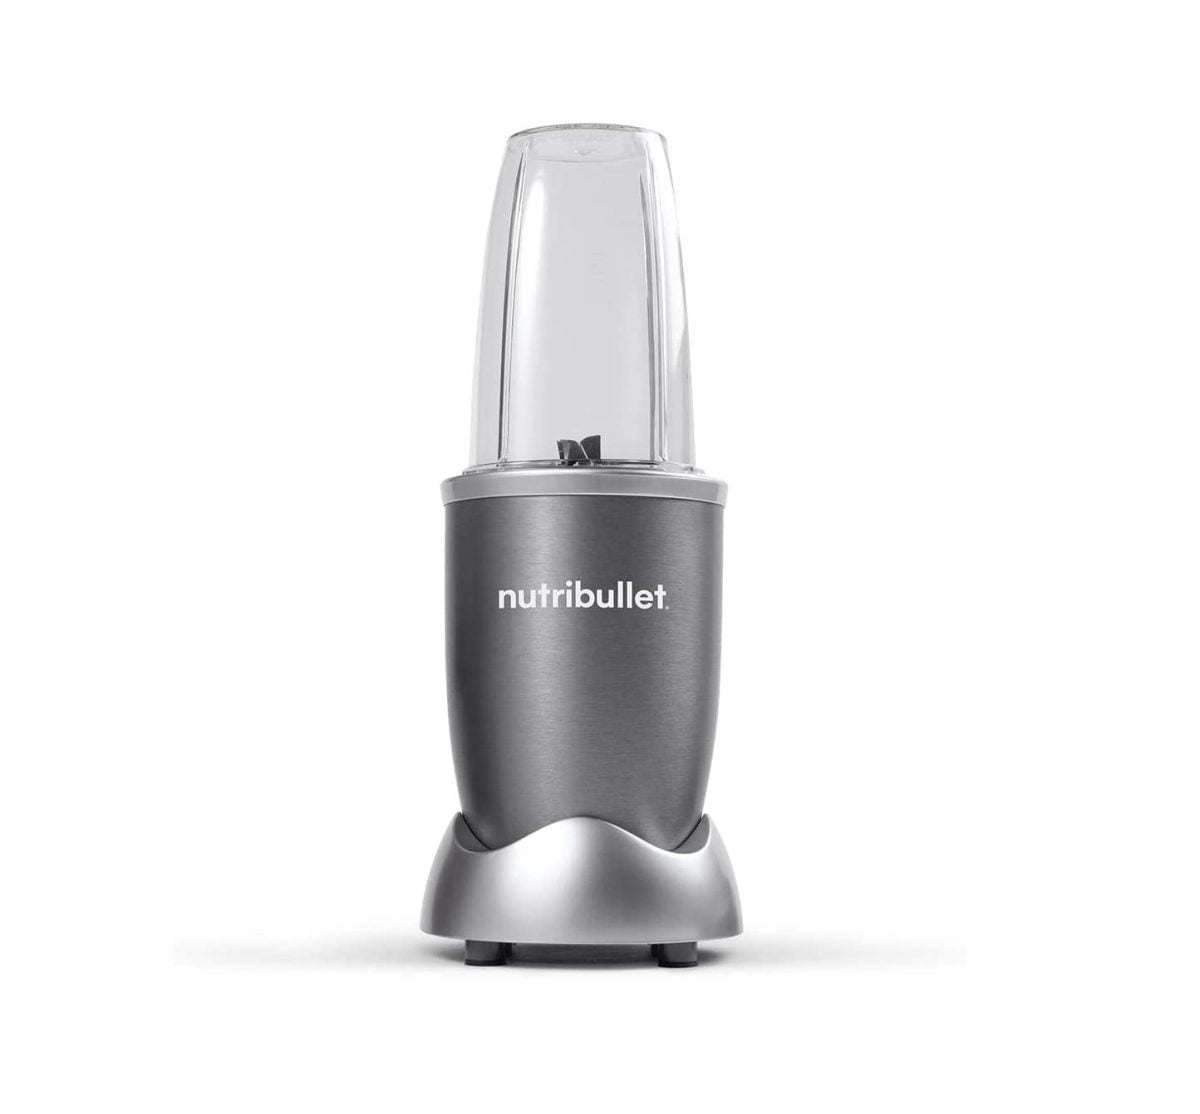 51Gribtjdl. Ac Sl1482 Nutribullet &Lt;Ul Class=&Quot;A-Unordered-List A-Vertical A-Spacing-Mini&Quot;&Gt; &Lt;Li&Gt;&Lt;Span Class=&Quot;A-List-Item&Quot;&Gt;Meet The Most Popular Nutribullet, Our Compact-Yet-Powerful Personal Blender. You Choose What Goes In To Get The Most Out Of Every Ingredient, Every Day.&Lt;/Span&Gt;&Lt;/Li&Gt; &Lt;Li&Gt;&Lt;Span Class=&Quot;A-List-Item&Quot;&Gt;The Nutribullet Is The Fastest, Easiest Solution For Making Nutrient-Packed Smoothies. Load It Up With Your Favorite Whole Foods Like Nuts, Berries, And Spinach, Then Push, Twist, And Blend Your Way To A Healthier Lifestyle.&Lt;/Span&Gt;&Lt;/Li&Gt; &Lt;Li&Gt;&Lt;Span Class=&Quot;A-List-Item&Quot;&Gt;Powerful 600-Watt Motor And Refined Nutrient-Extraction Blades Blend Whole Foods Into Liquid Fuel For Your Body - In Seconds.&Lt;/Span&Gt;&Lt;/Li&Gt; &Lt;Li&Gt;&Lt;Span Class=&Quot;A-List-Item&Quot;&Gt;Hassle-Free Cleaning - Simply Twist Off The Blade, Rinse With Soap And Water, And Put The Cups In The Top Rack Of The Dishwasher.&Lt;/Span&Gt;&Lt;/Li&Gt; &Lt;Li&Gt;&Lt;Span Class=&Quot;A-List-Item&Quot;&Gt;What You Get: (1) 600 Watt Motor Base, (1) Extractor Blade, (1) 700Ml Cup, (1) 500Ml Cup, (1) Lip Ring With Handle, (1) Solid Lid, (1) User Guide, (1) Recipe Book. 2 Years Brand Warranty&Lt;/Span&Gt;&Lt;/Li&Gt; &Lt;/Ul&Gt; Nutribullet Nutribullet 600 Watts, 8 Piece Set, Multi-Function High Speed Blender, Mixer System With Nutrient Extractor, Smoothie Maker, Gray